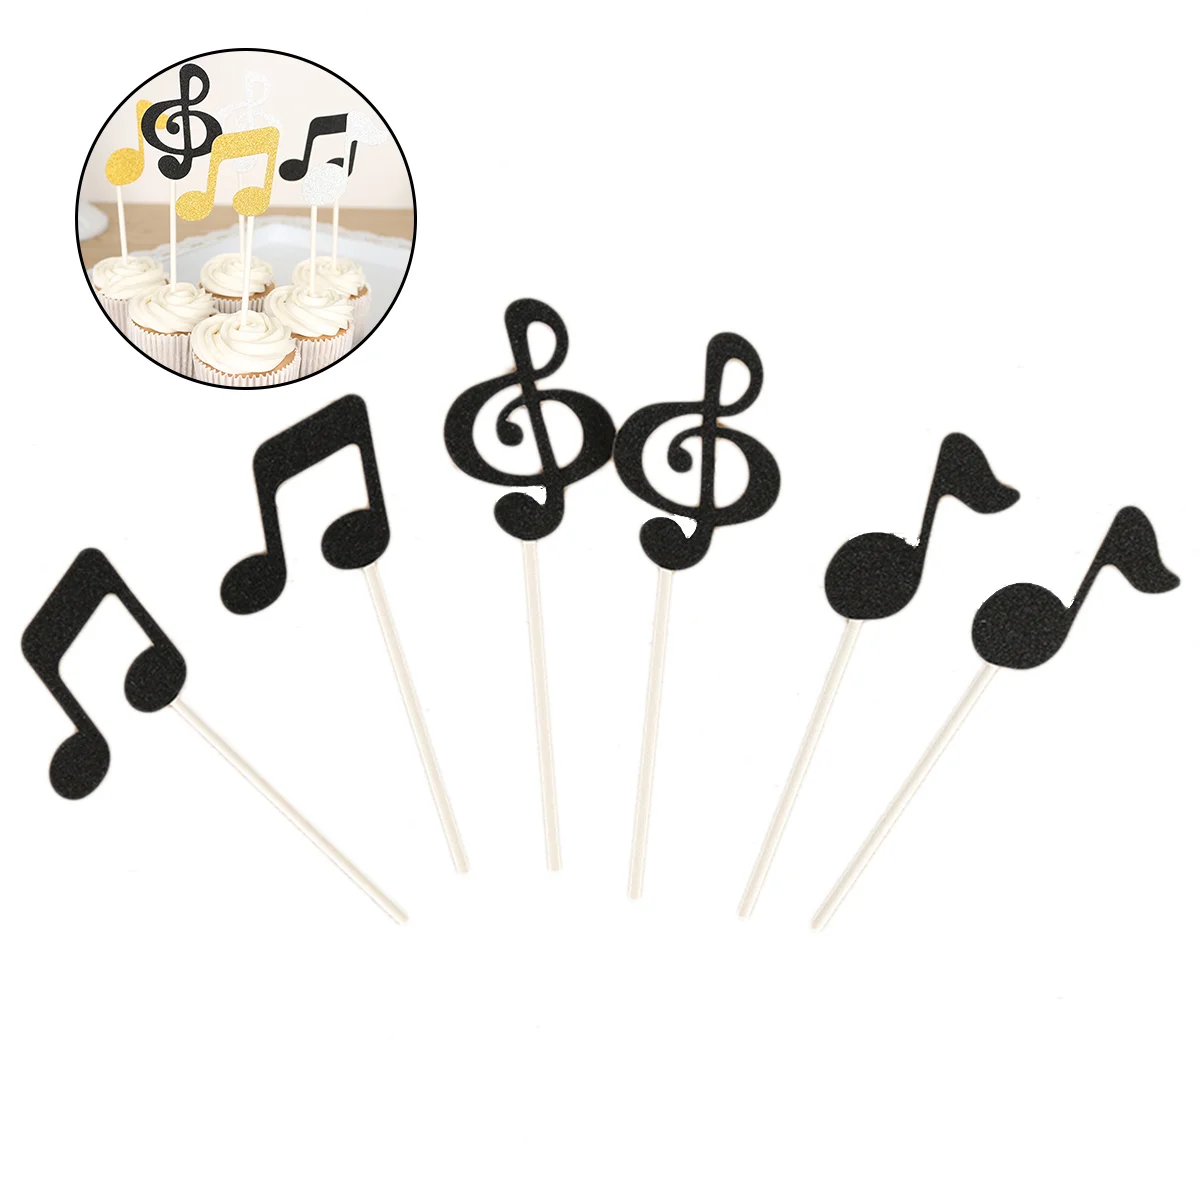 

18PCS Glittery Notation Birthday Set Musical Notation Party Decoration for Baby Shower Wedding Birthday